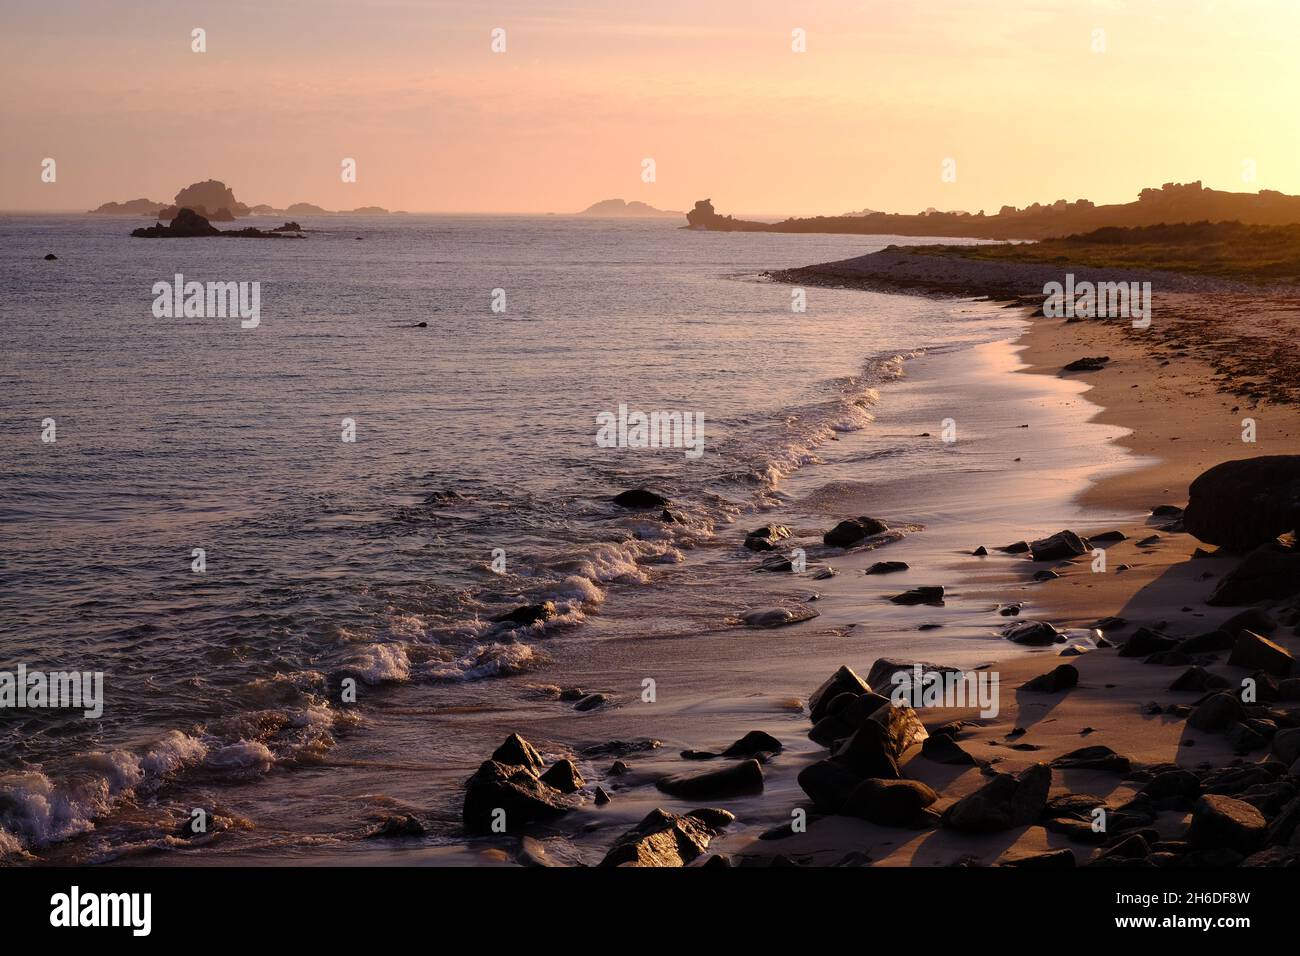 Rushy Bay, Bryher, at sunset, showing Droppy Nose Point in the distance Stock Photo